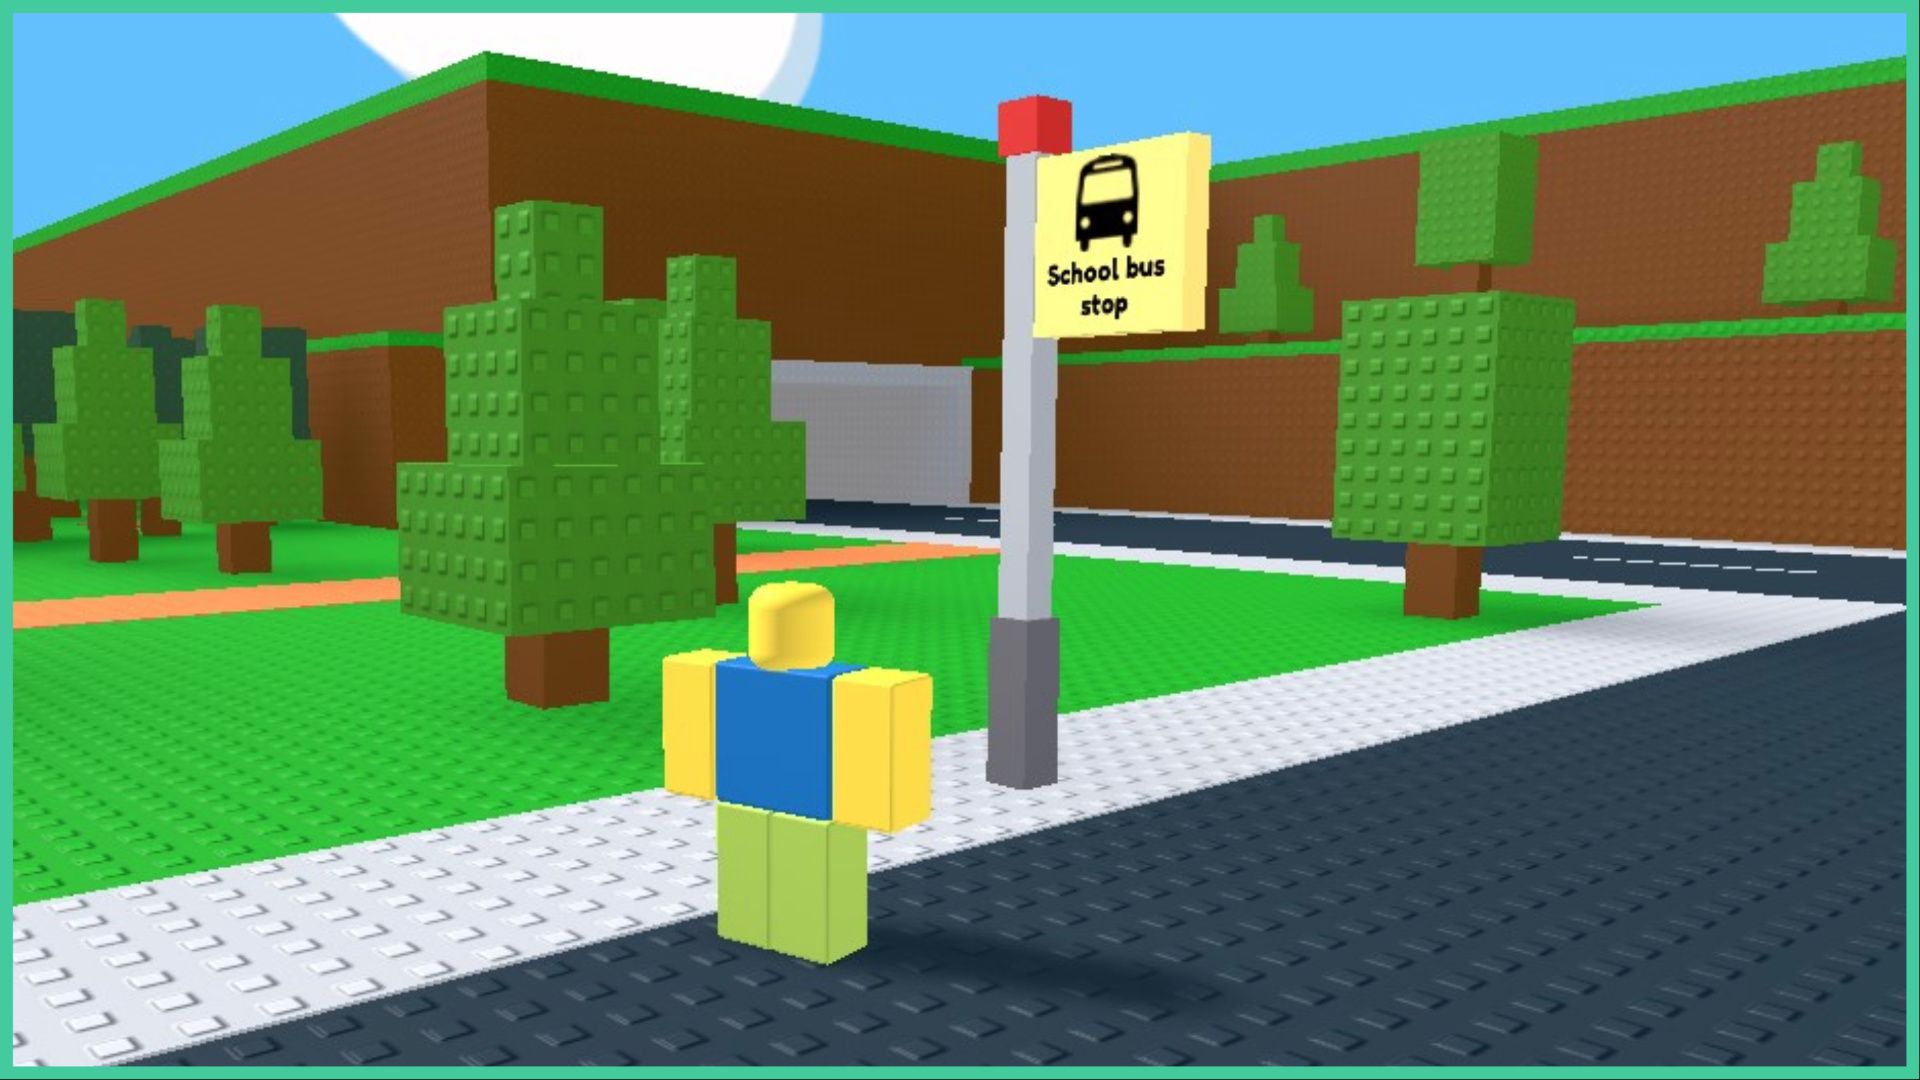 feature image for our need more heat all endings guide, the image features a screenshot from the game of the roblox character standing by the school bus stop sign by the road, they are surrounded by trees and hills as the road leads into a tunnel